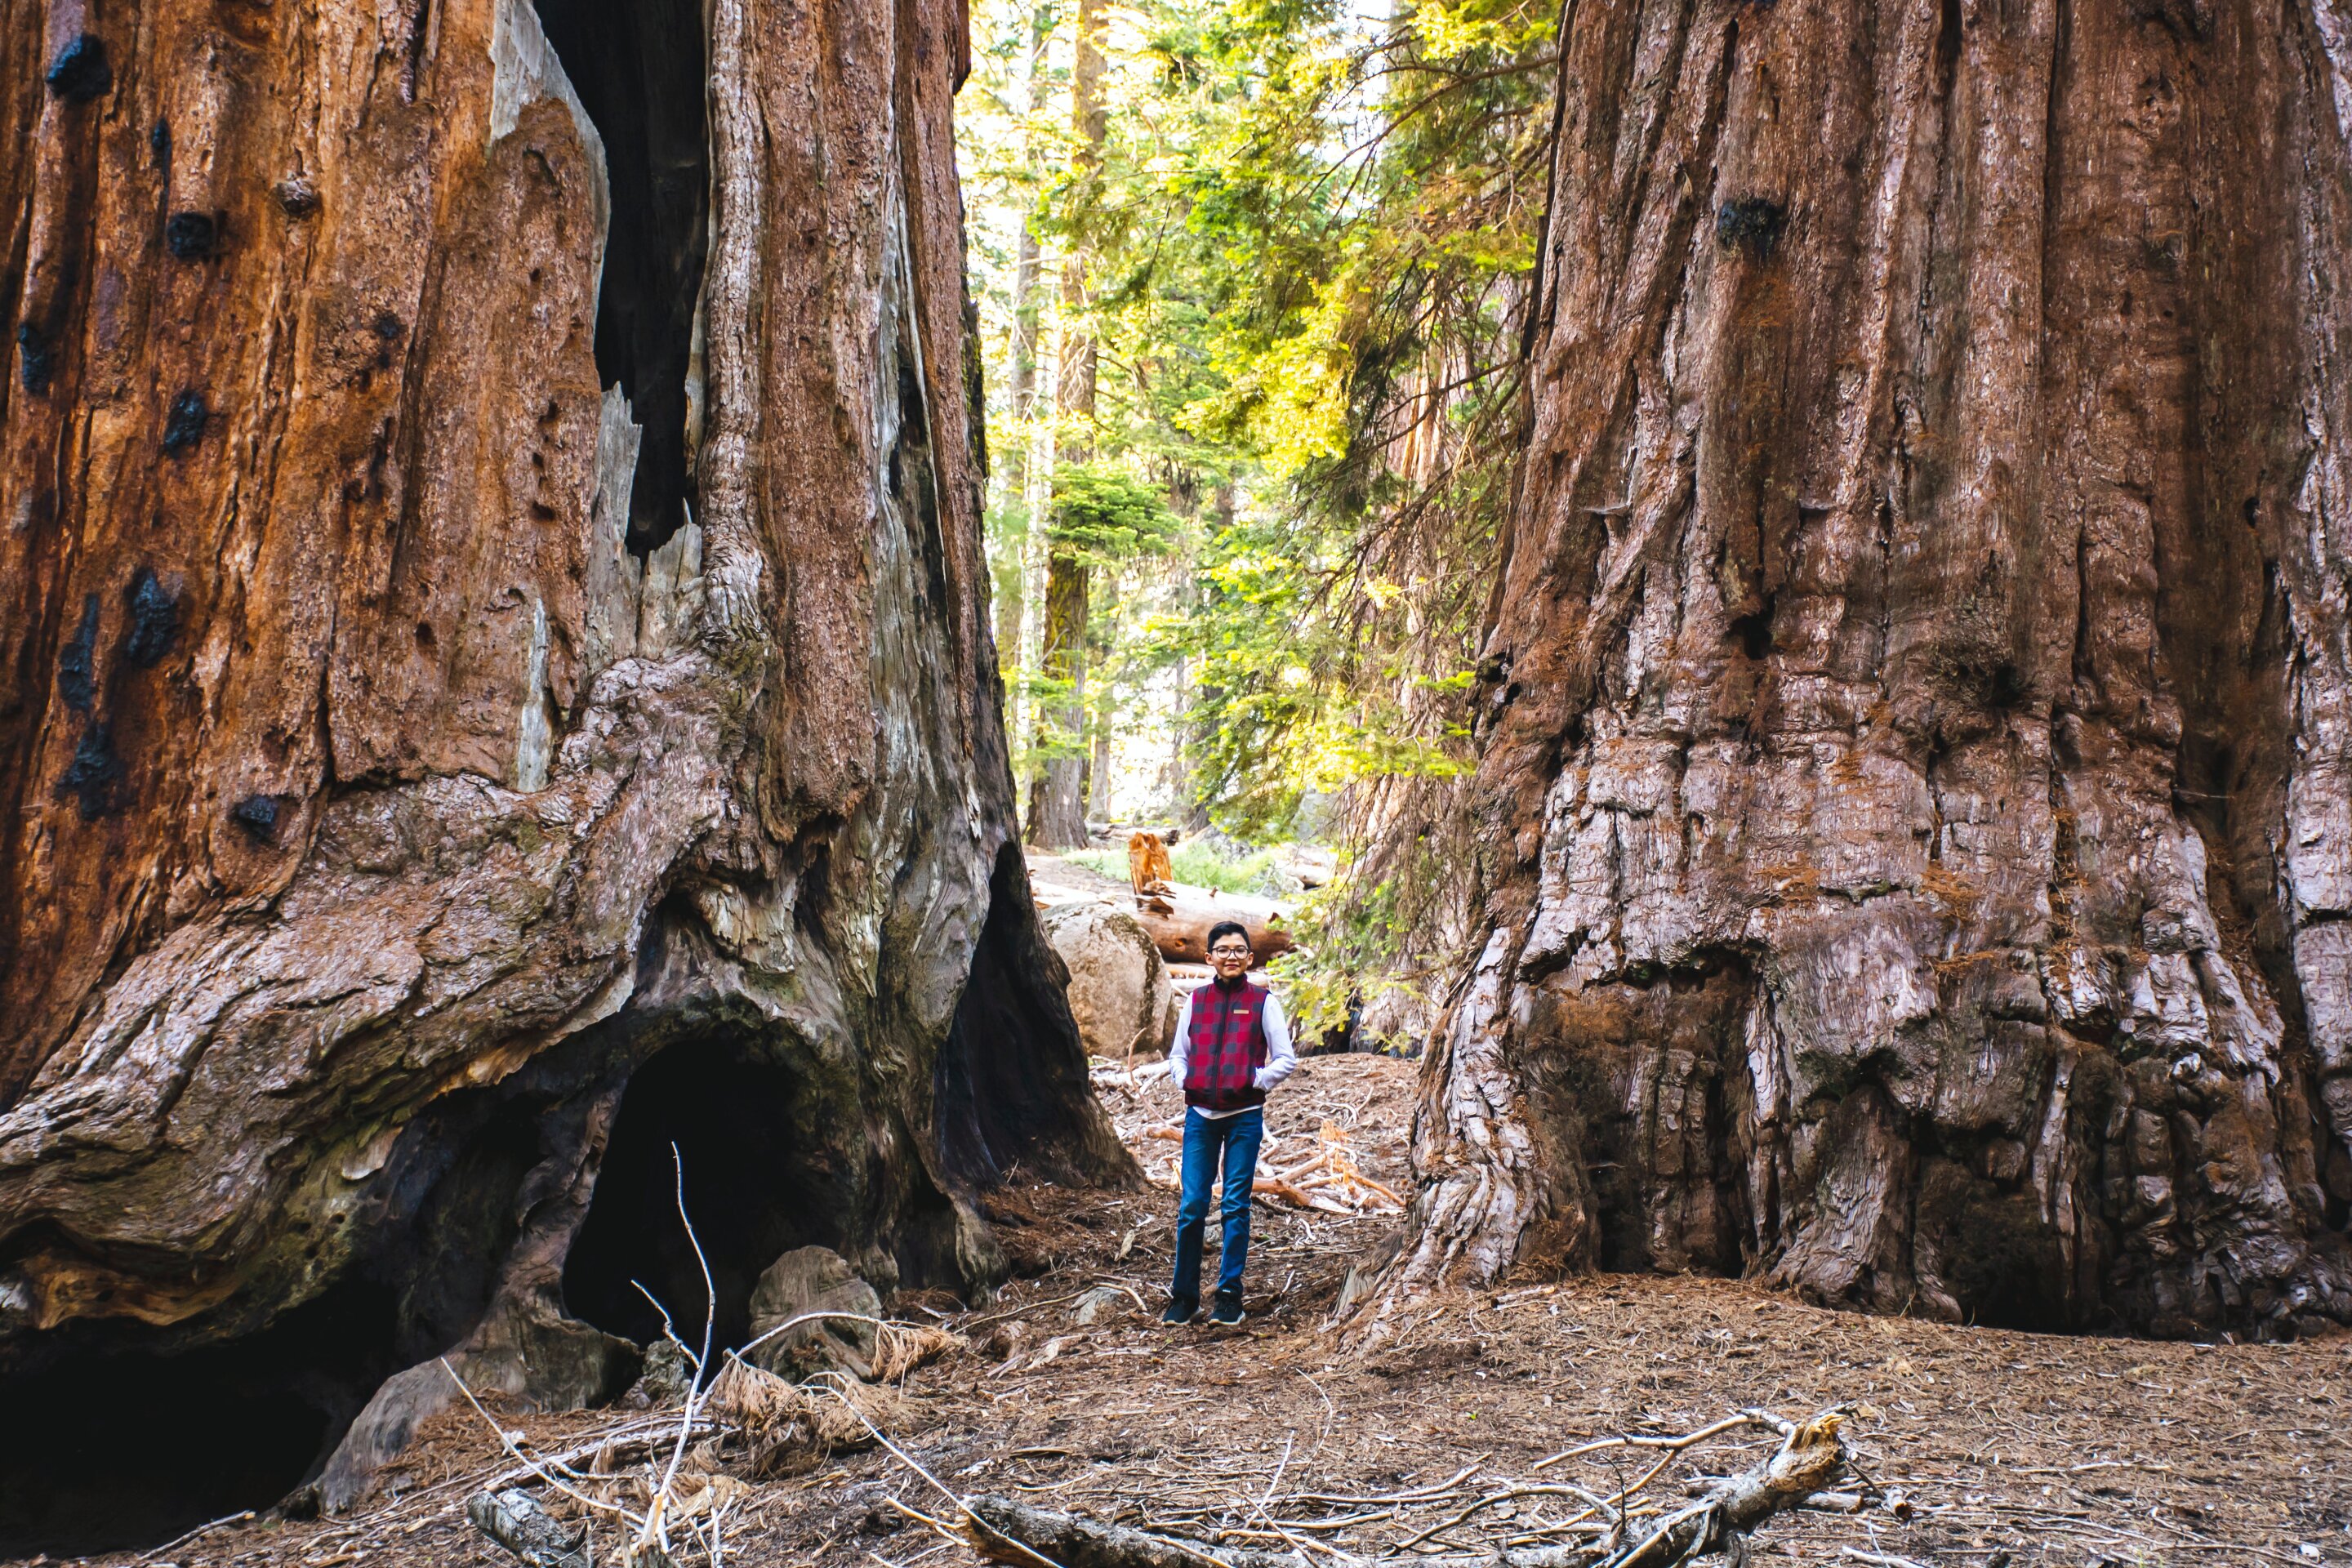 A planned fire threatened lives of two California sequoias; now they are sprouting new life